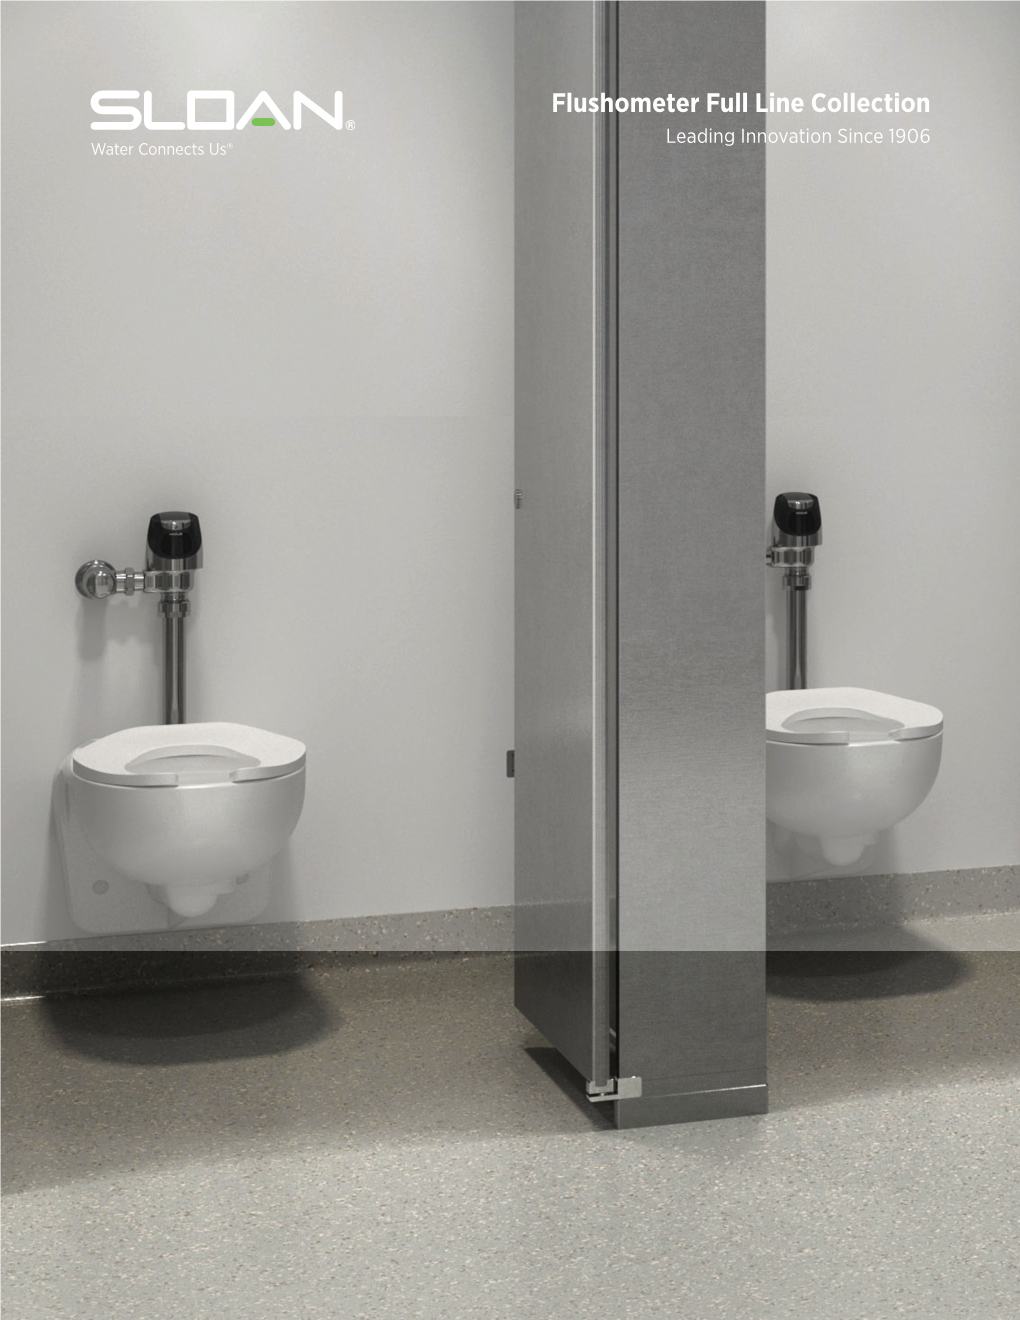 Flushometer Full Line Collection Leading Innovation Since 1906 Shown: Royal® 111 Flushometer with ST-2459 Wall Hung Water Closet